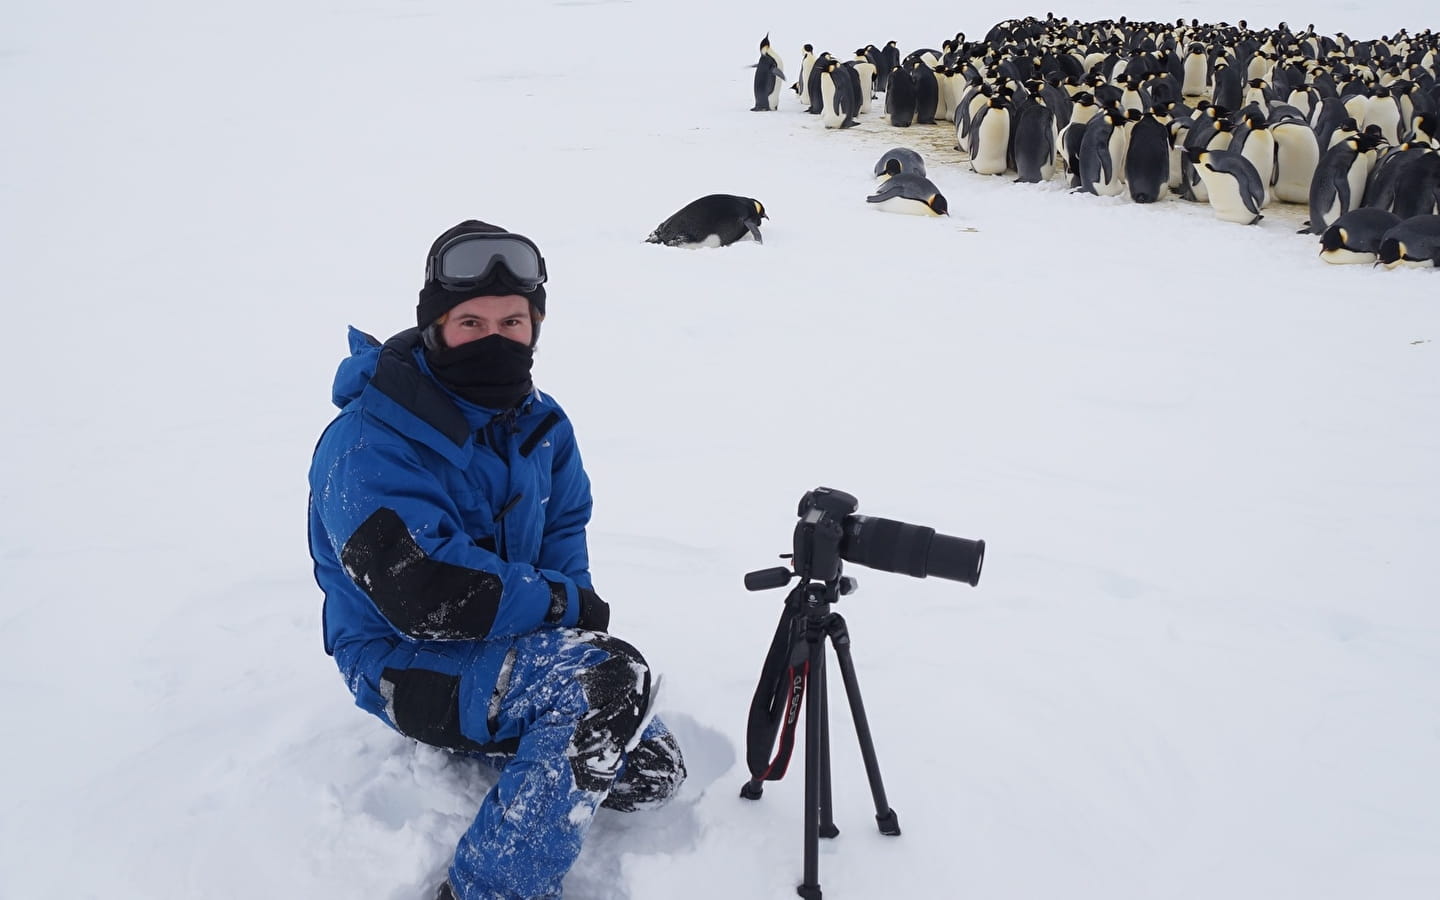 Lecture '14 months in Antarctica' by Alexis Carron, natural ecologist